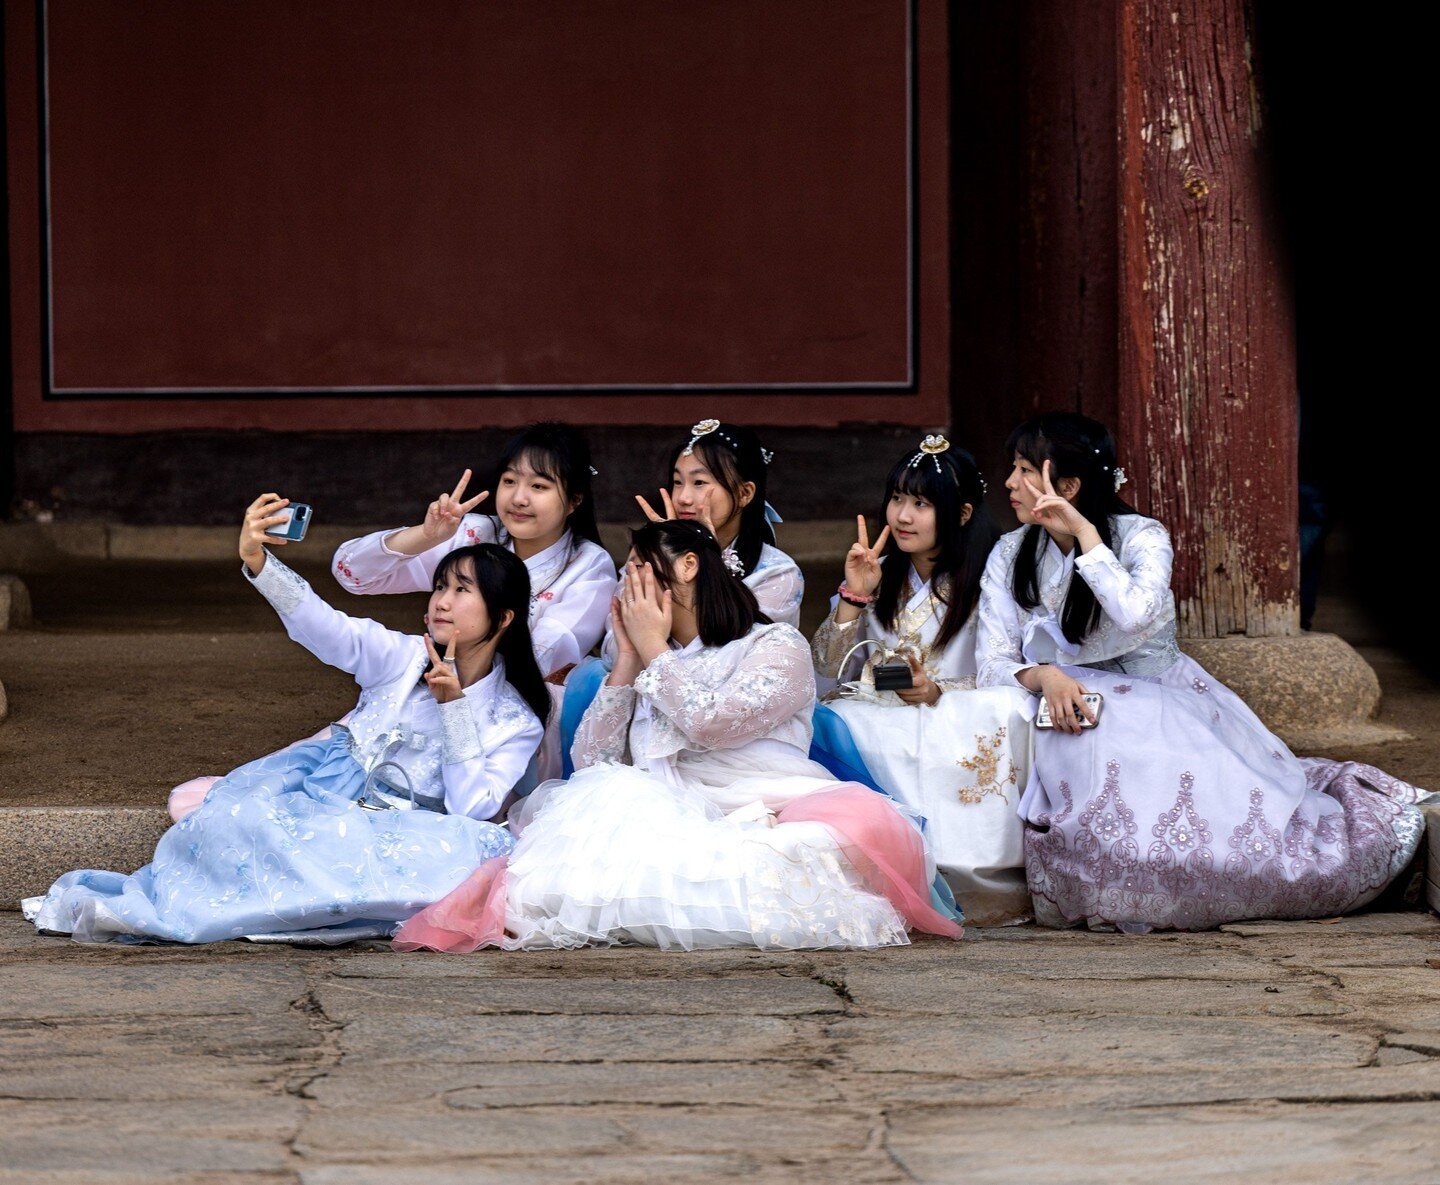 Children in traditional Korean #hanbok outfits posing for a selfie at the #Gyeongbokgung palace